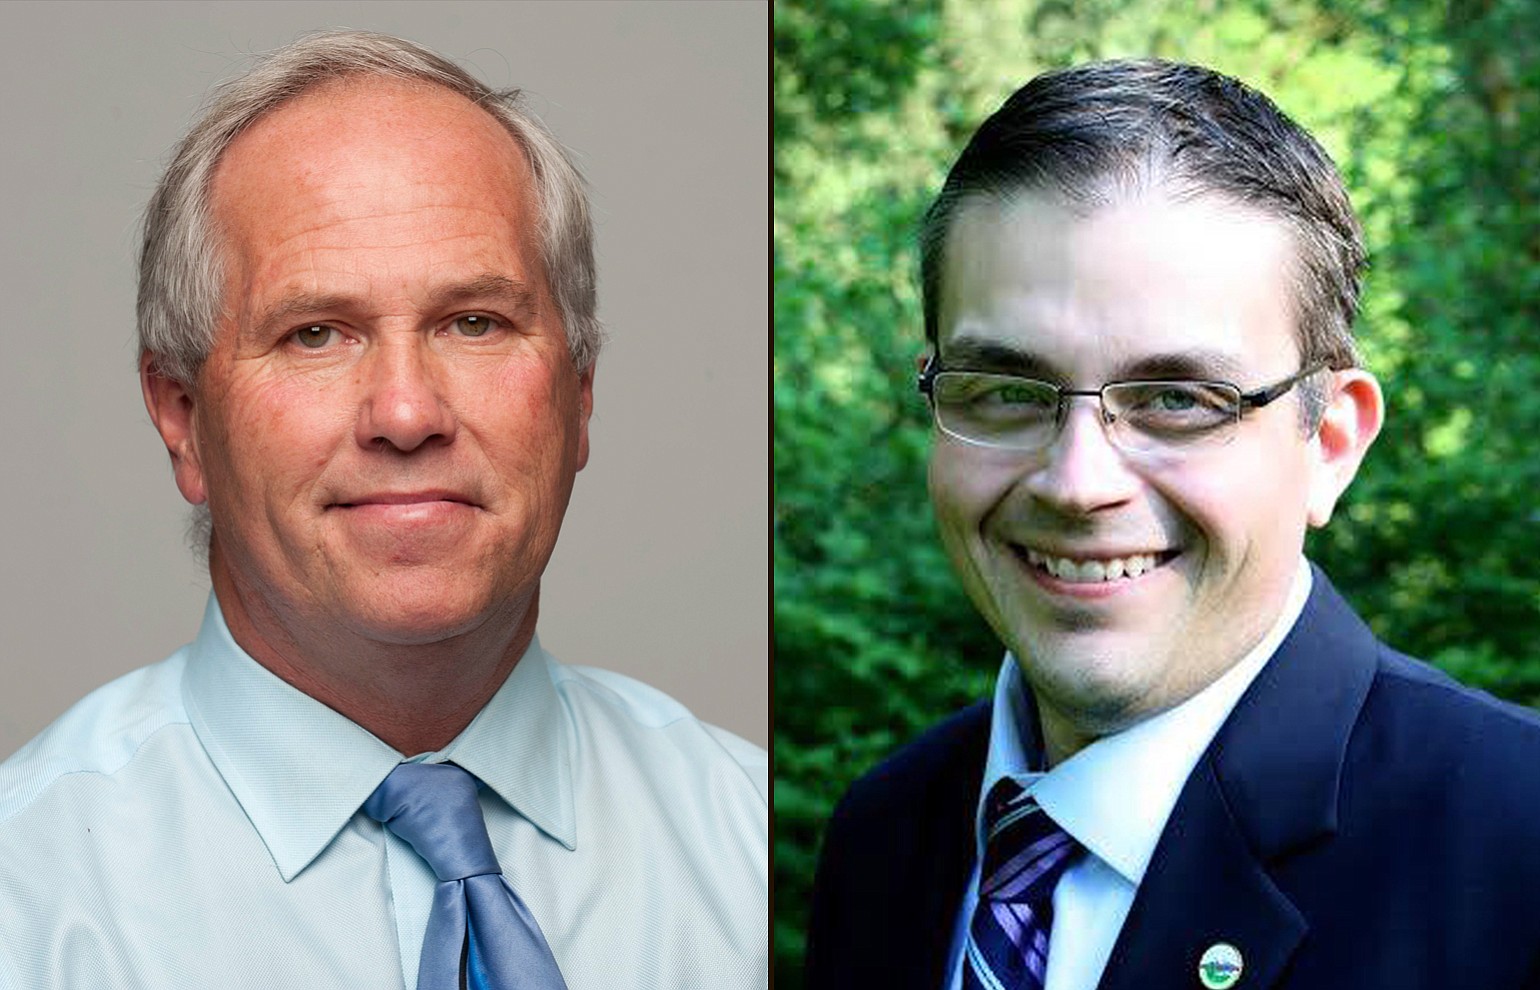 In the race for Clark County council chair, Democrat Mike Dalesandro and Marc Boldt, no party preference, will advance to the general election.